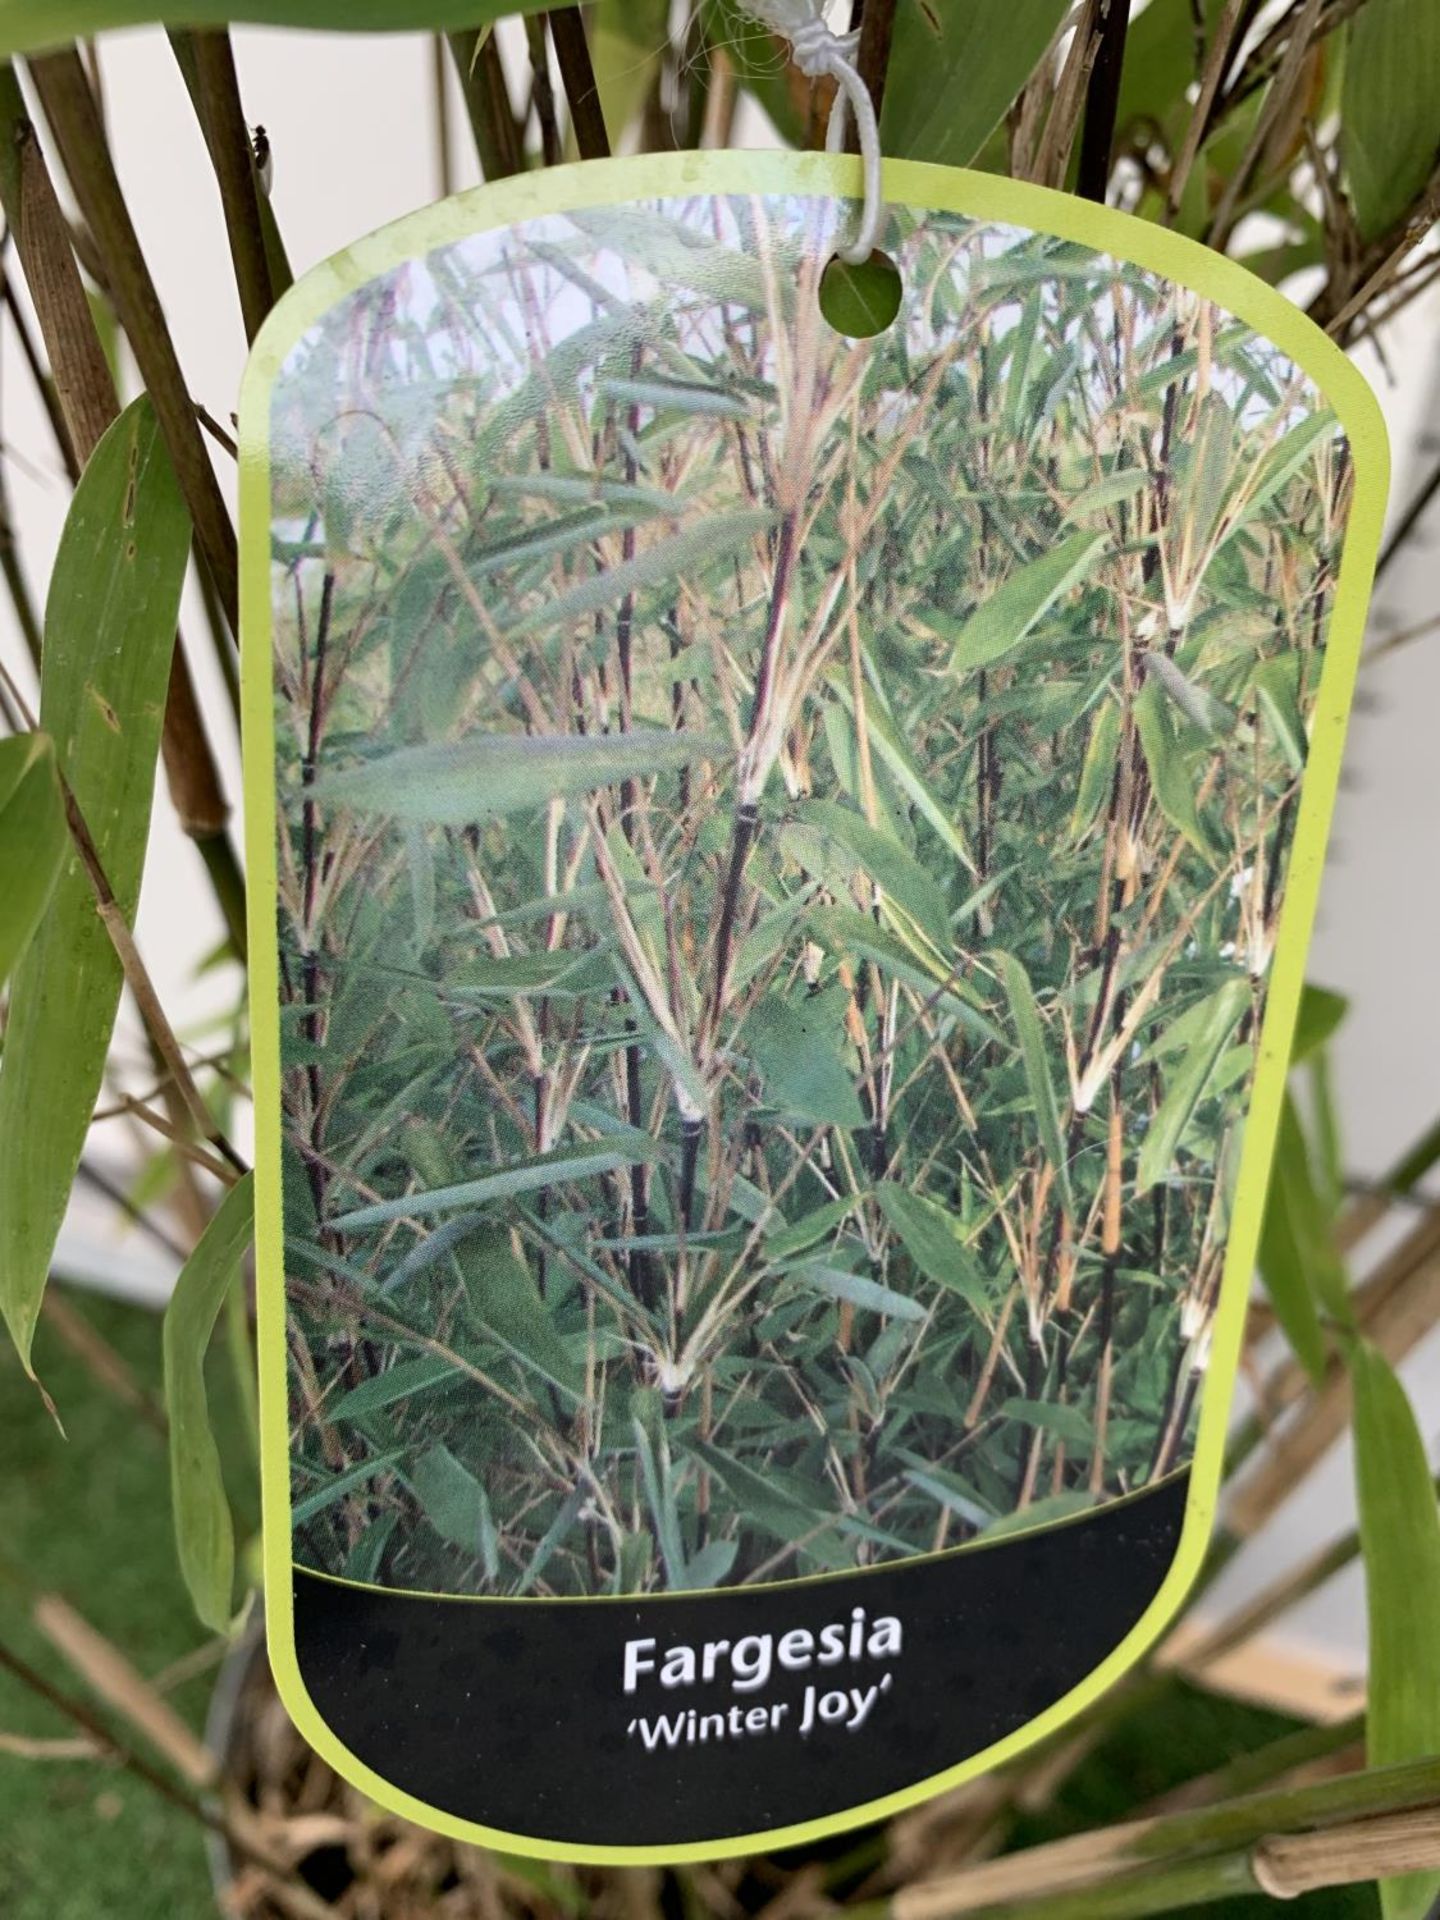 TWO FARGESIA BAMBOO PLANTS 'WINTER JOY' APPROX 180CM IN HEIGHT PLUS VATTO BE SOLD FOR THE TWO - Image 4 of 4